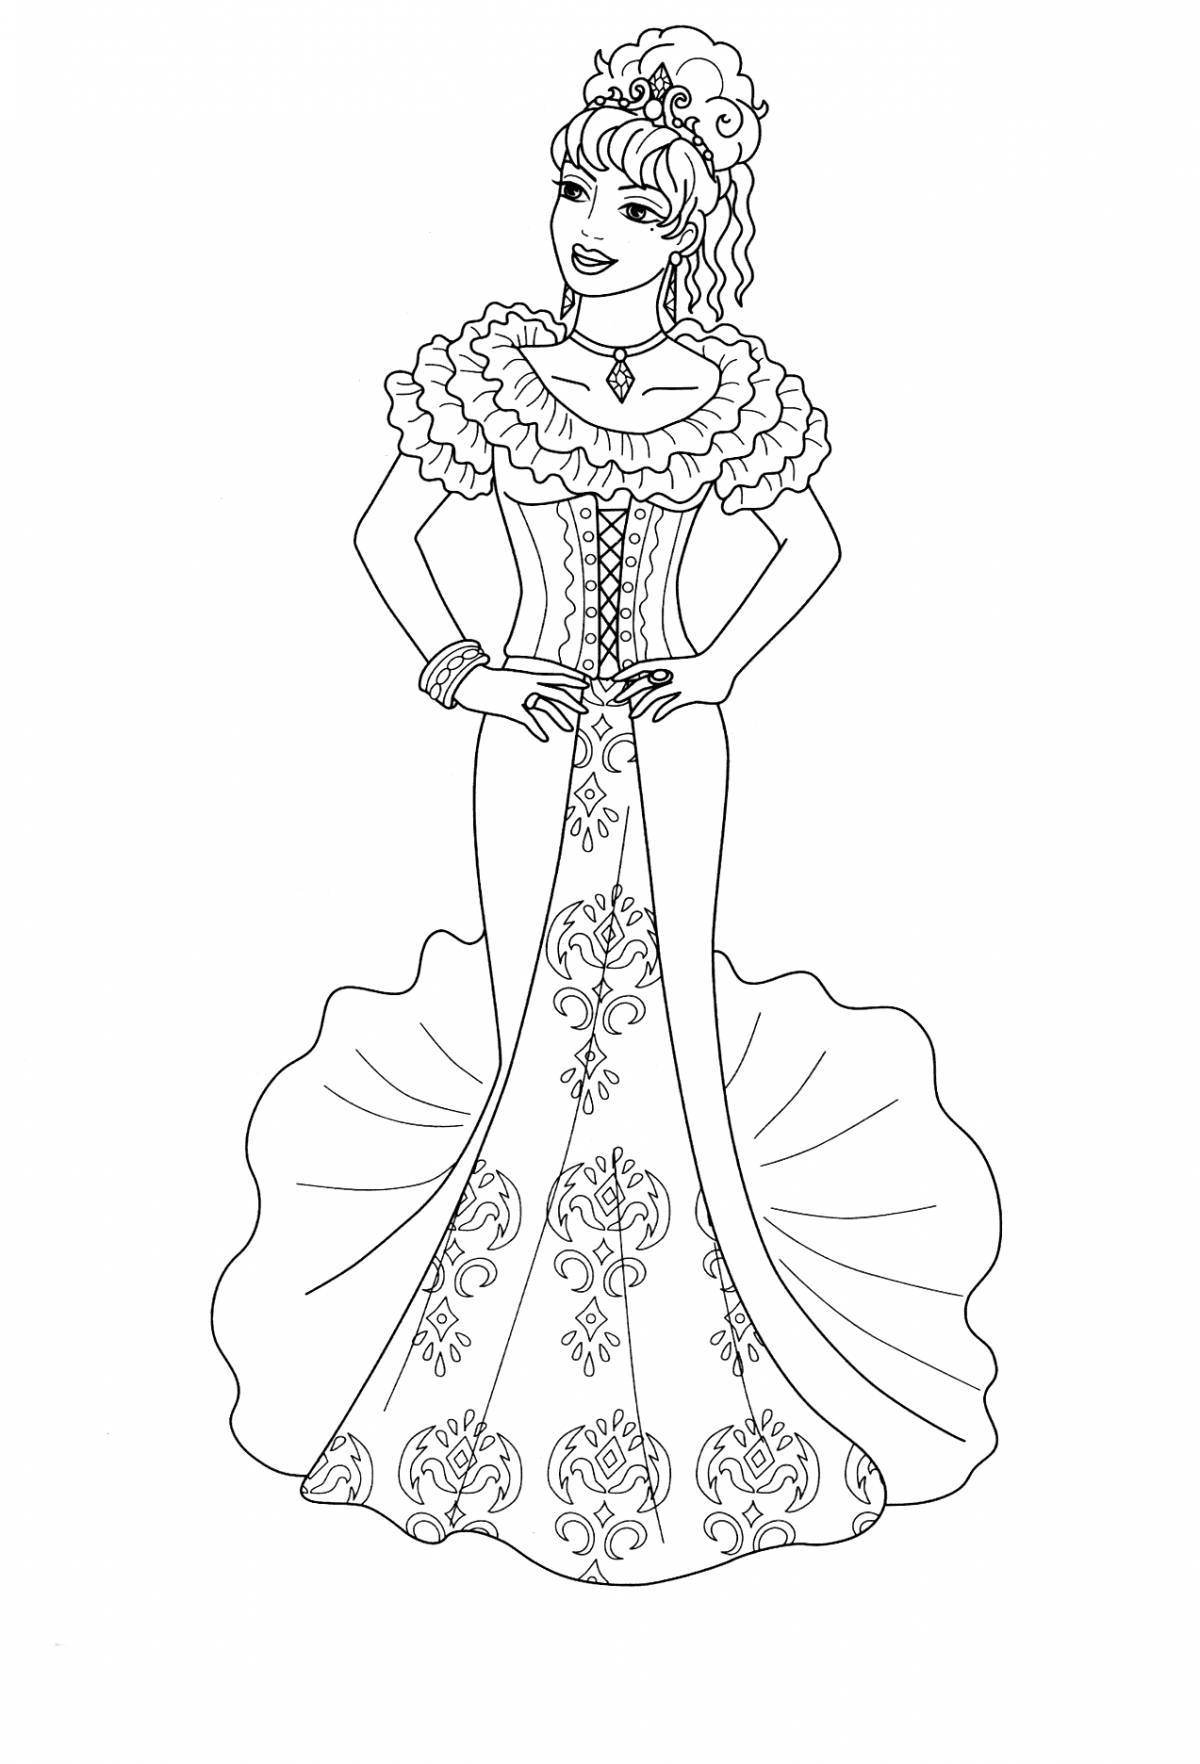 Adorable coloring pages of princesses in beautiful dresses